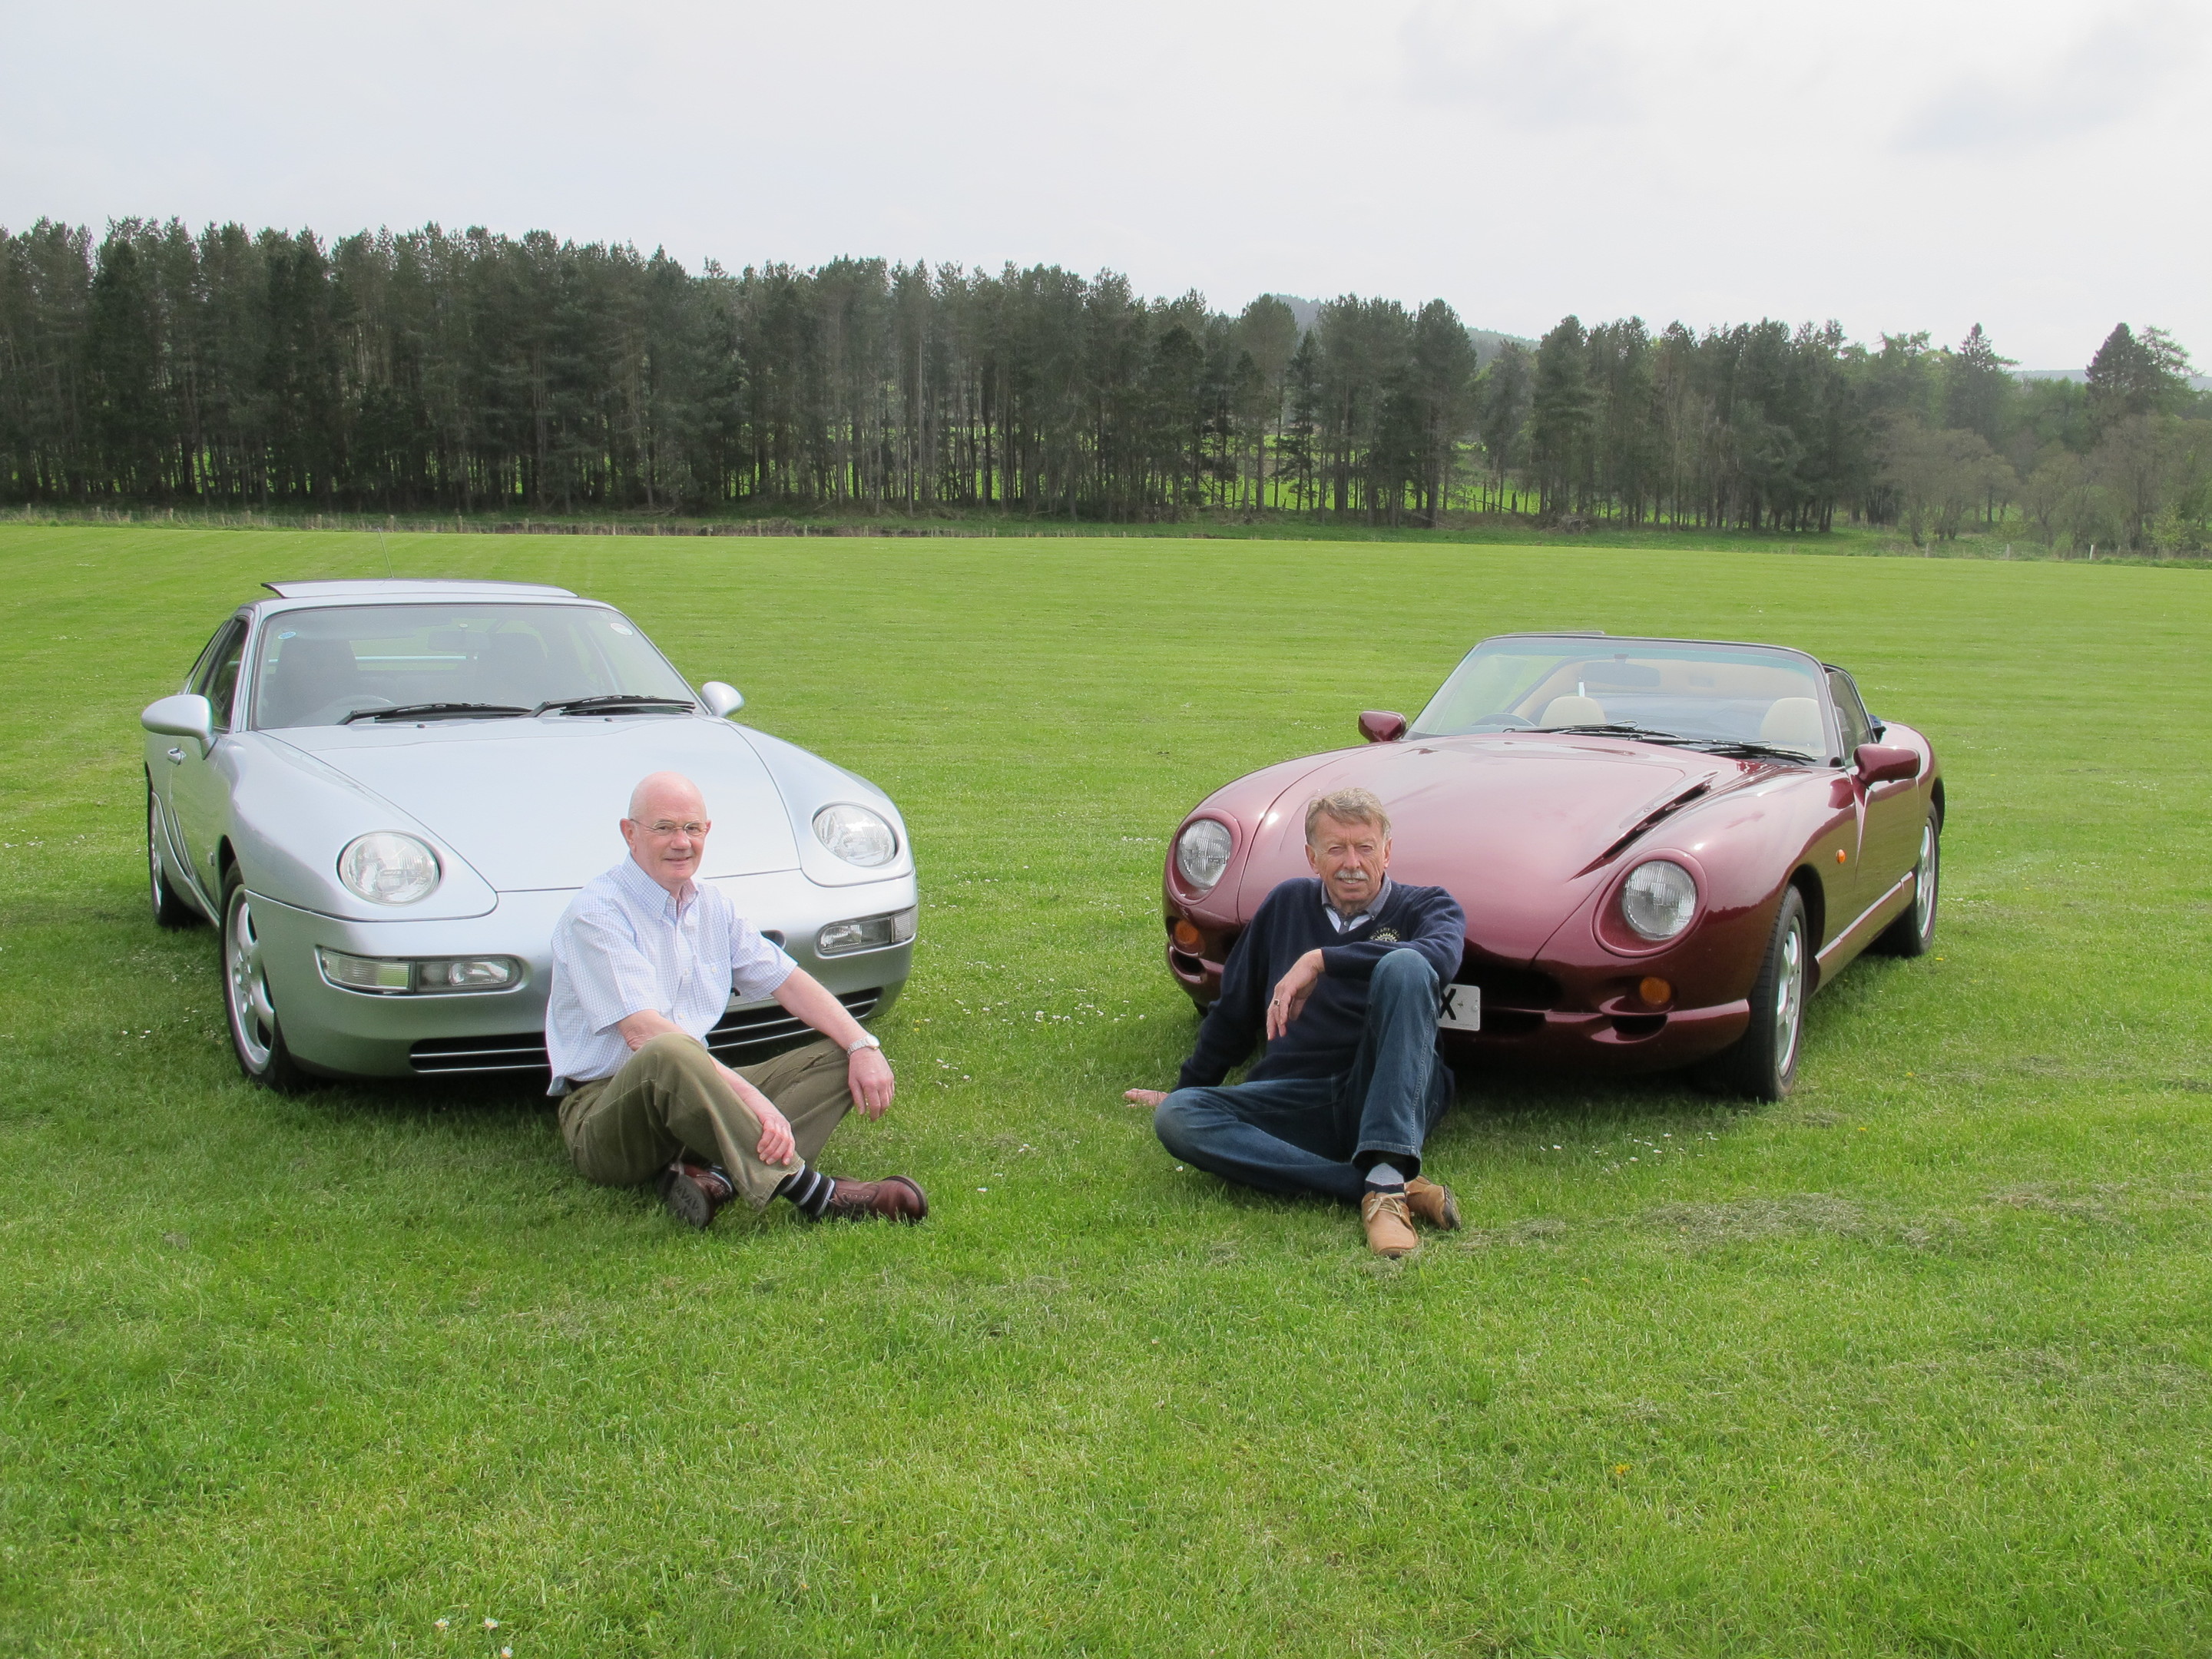 Crathes Vintage Car Rally organising committee chairman Stewart Park, with his 1994 Porsche 968 Sport sits on the grass with past president Richard Bridger and his TVR Chimacra 450